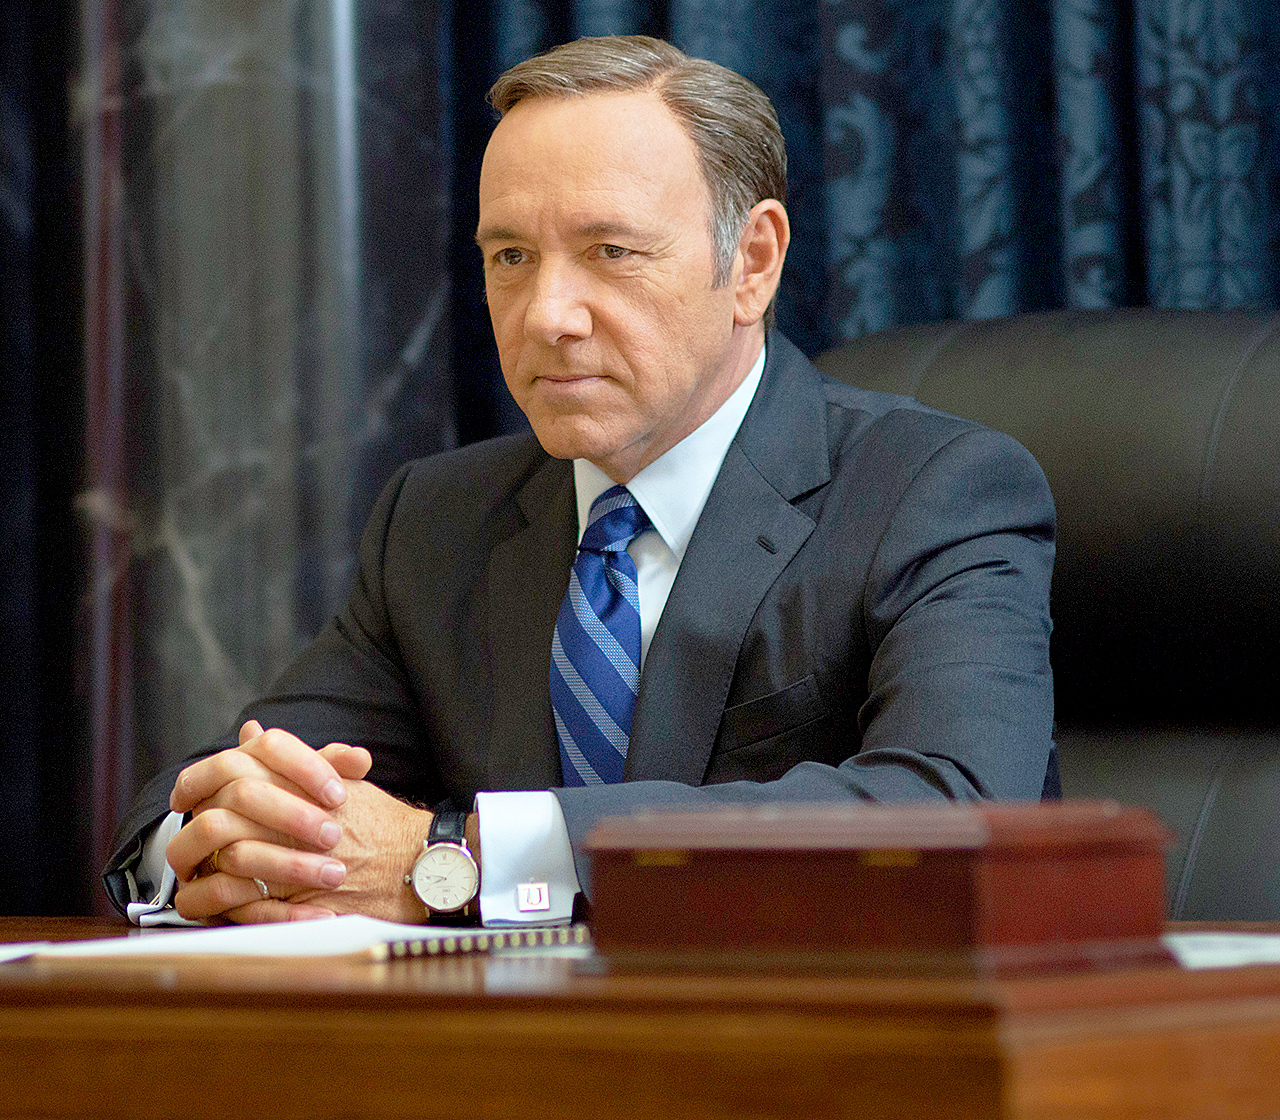 1431547593_kevin spacey house of cards zoom